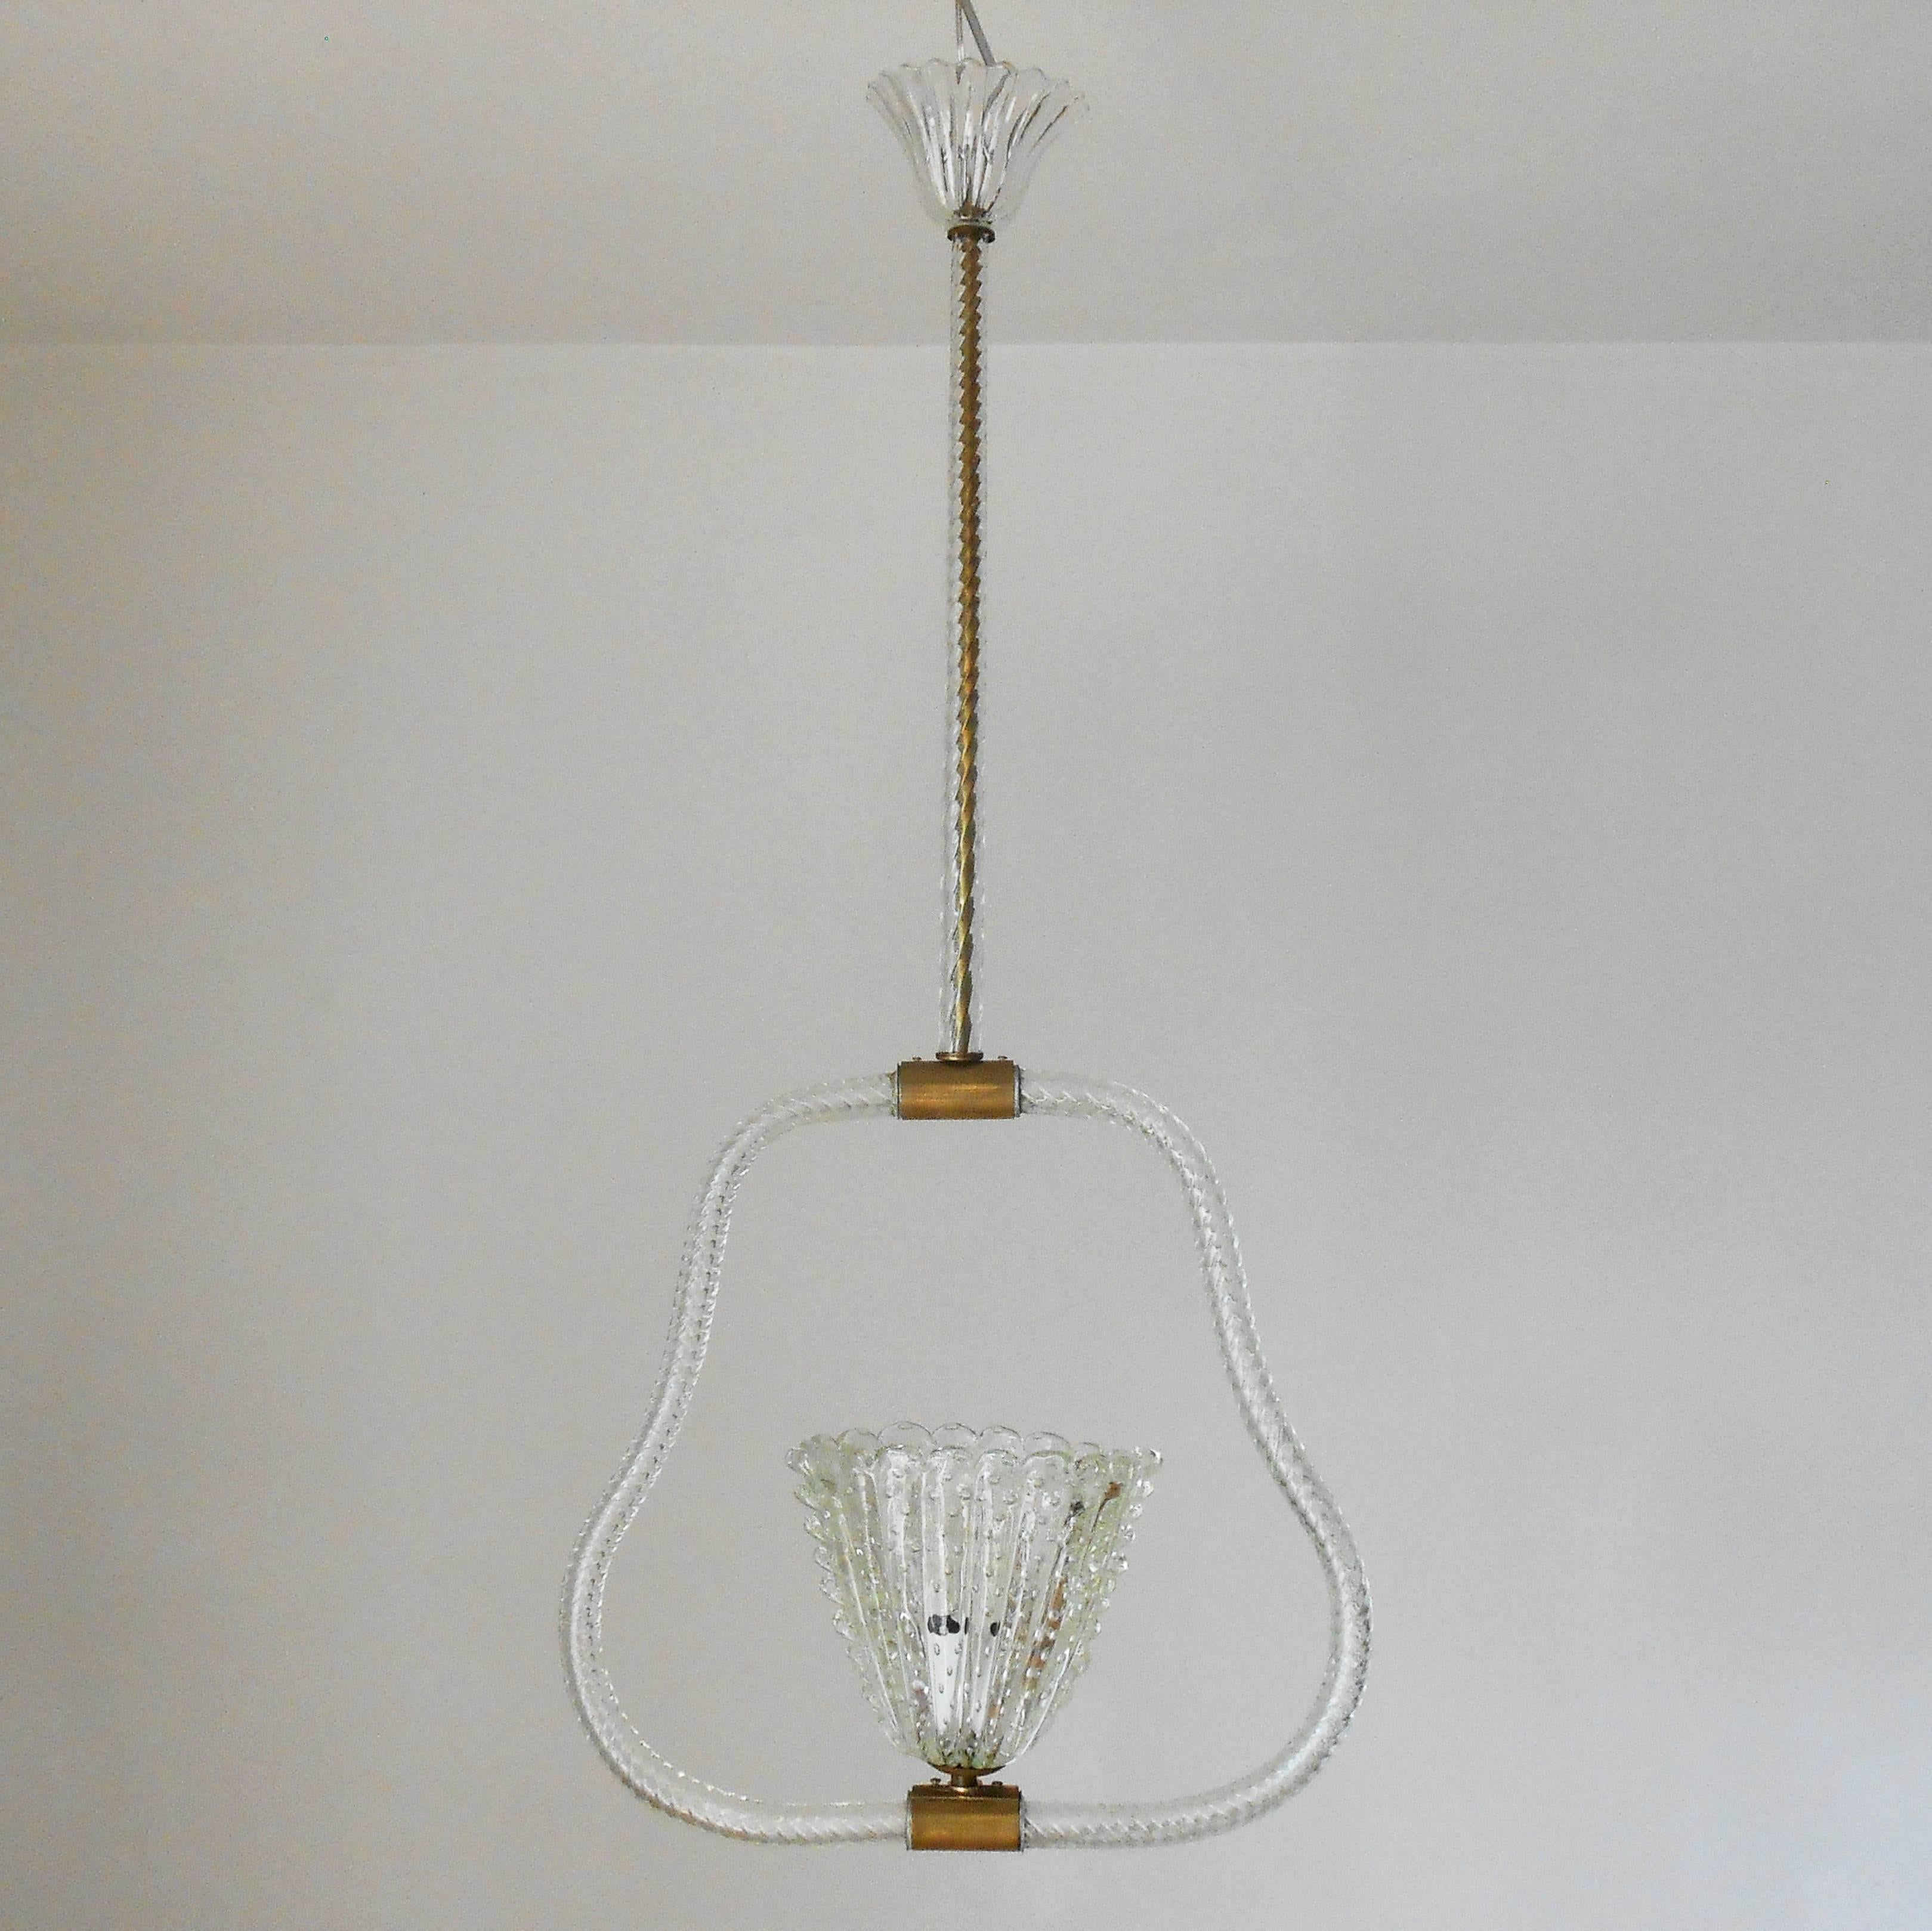 Vintage Italian pendant with clear Murano glass hand blown with bubbles within the glass using Pulegoso technique and brass details / Designed by Ercole Barovier circa 1950’s / Made in Italy
1 light / E26 or E27 type / max 60W
Height: 40 inches /